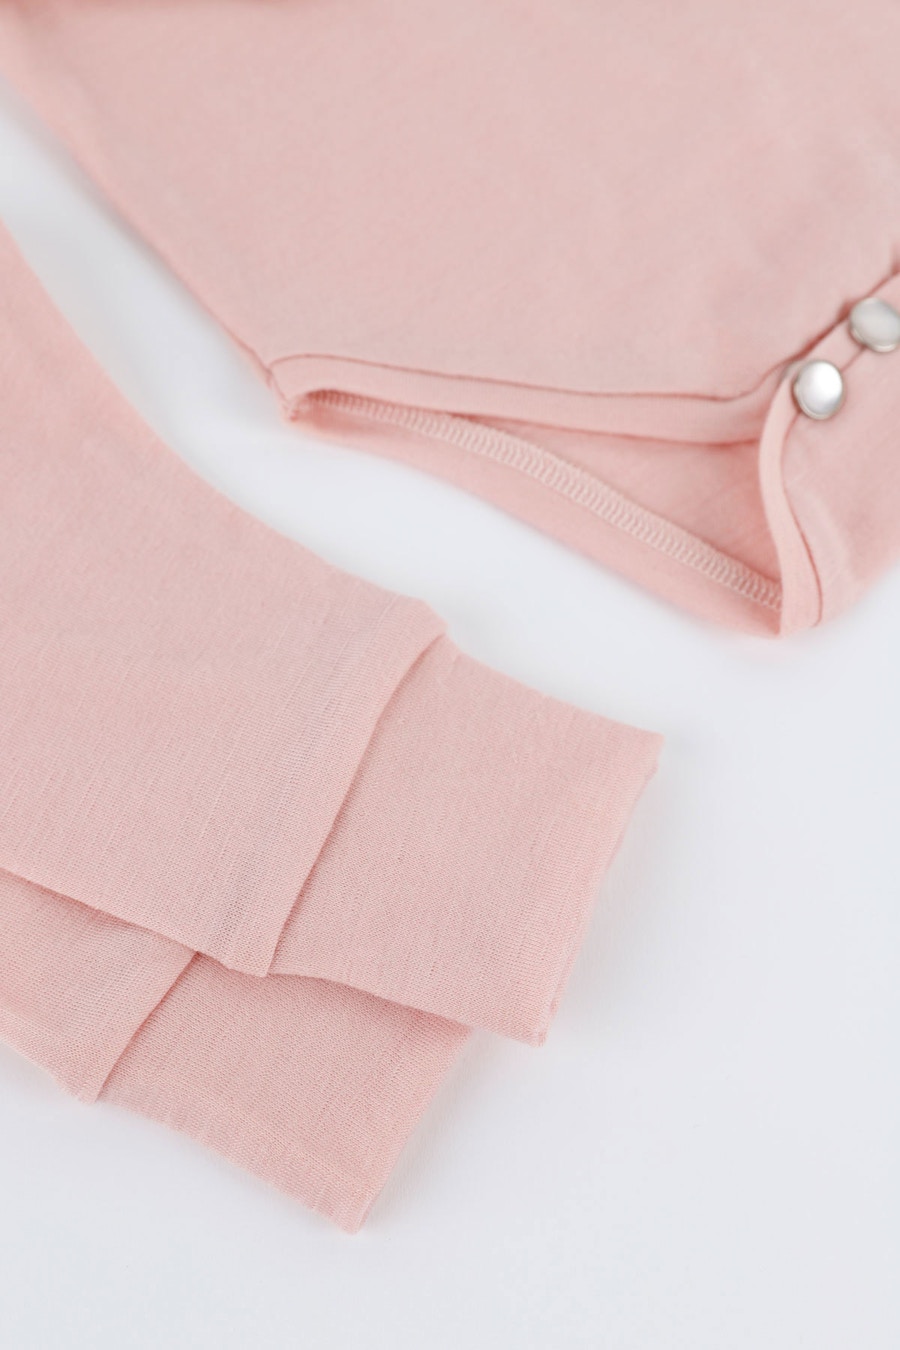 New baby essentials details petal zq merino by the fabric store